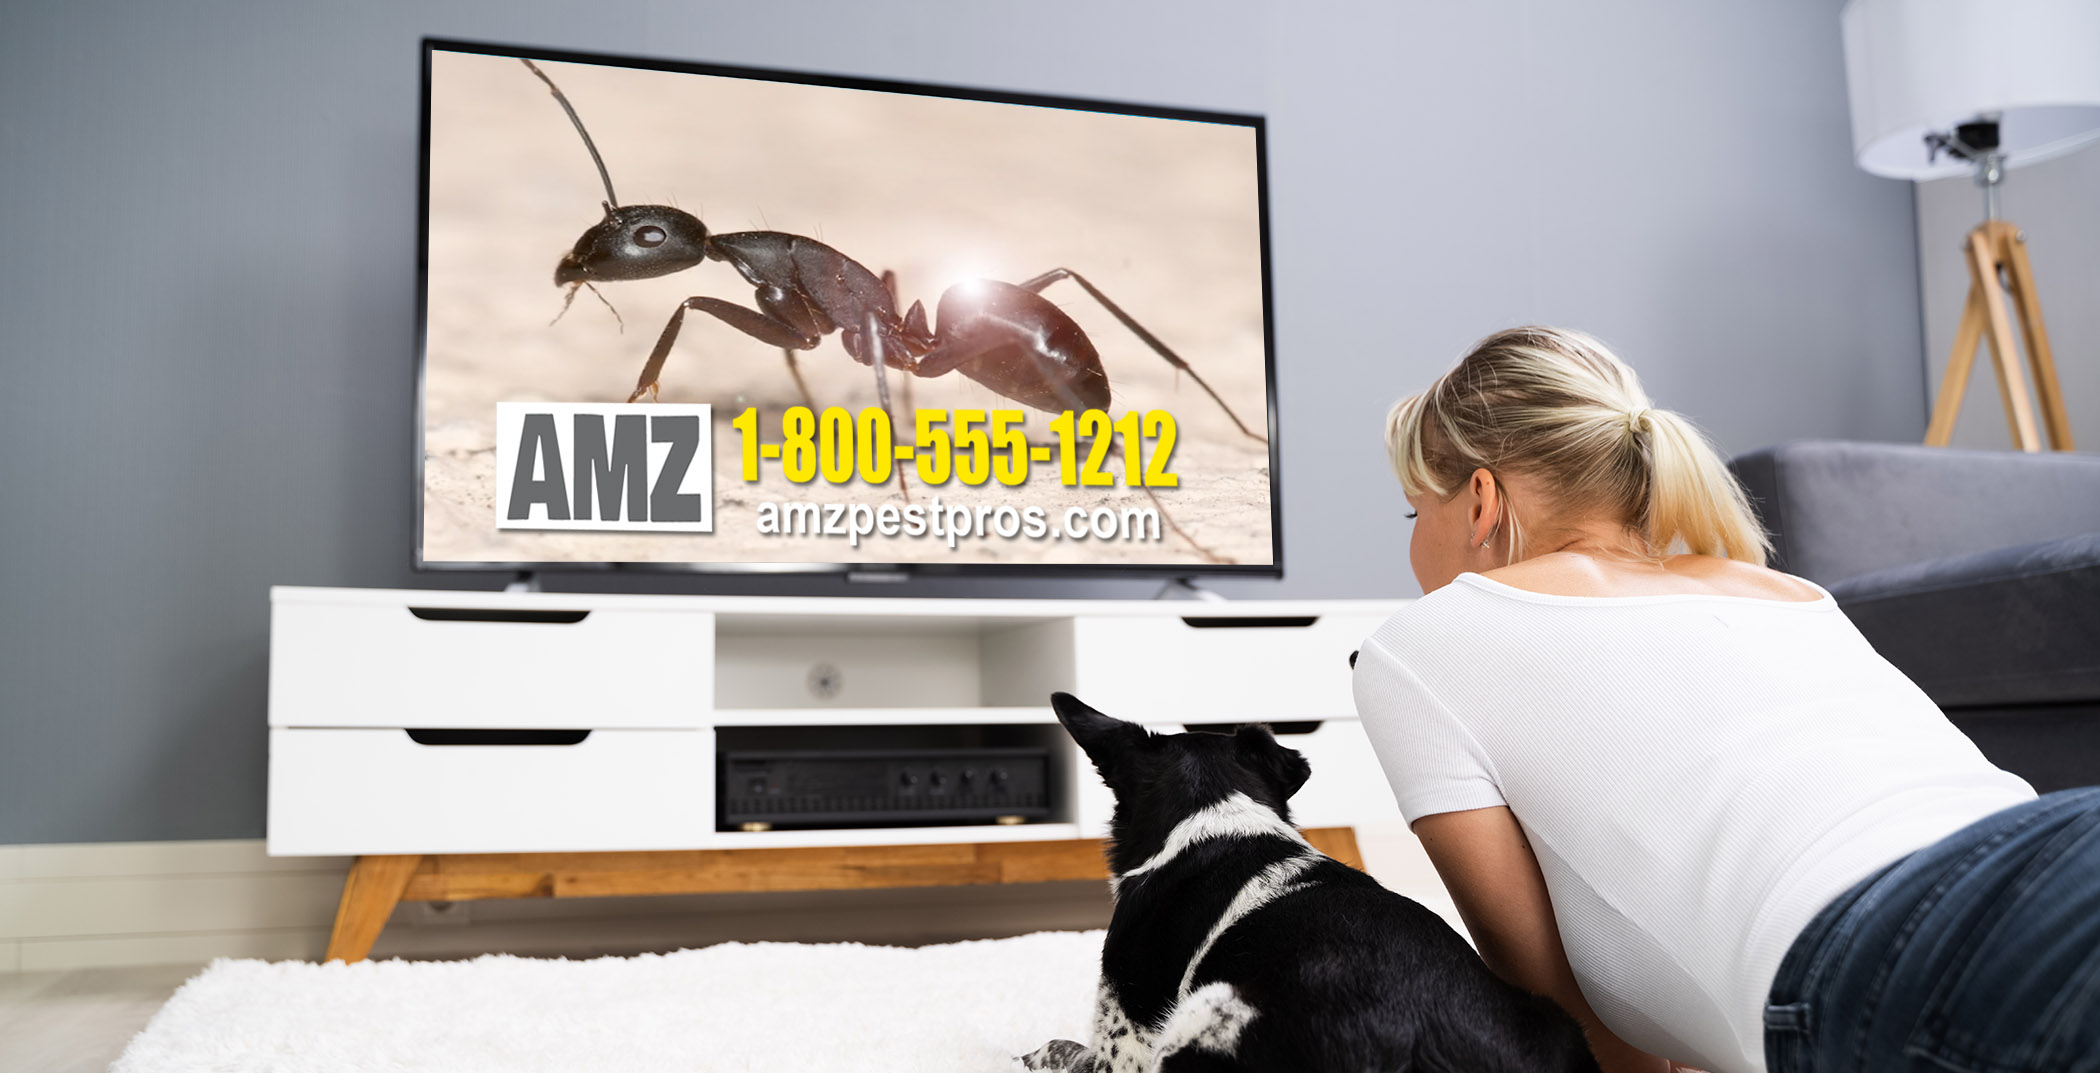 Use TV to reach homeowners in your immediate market